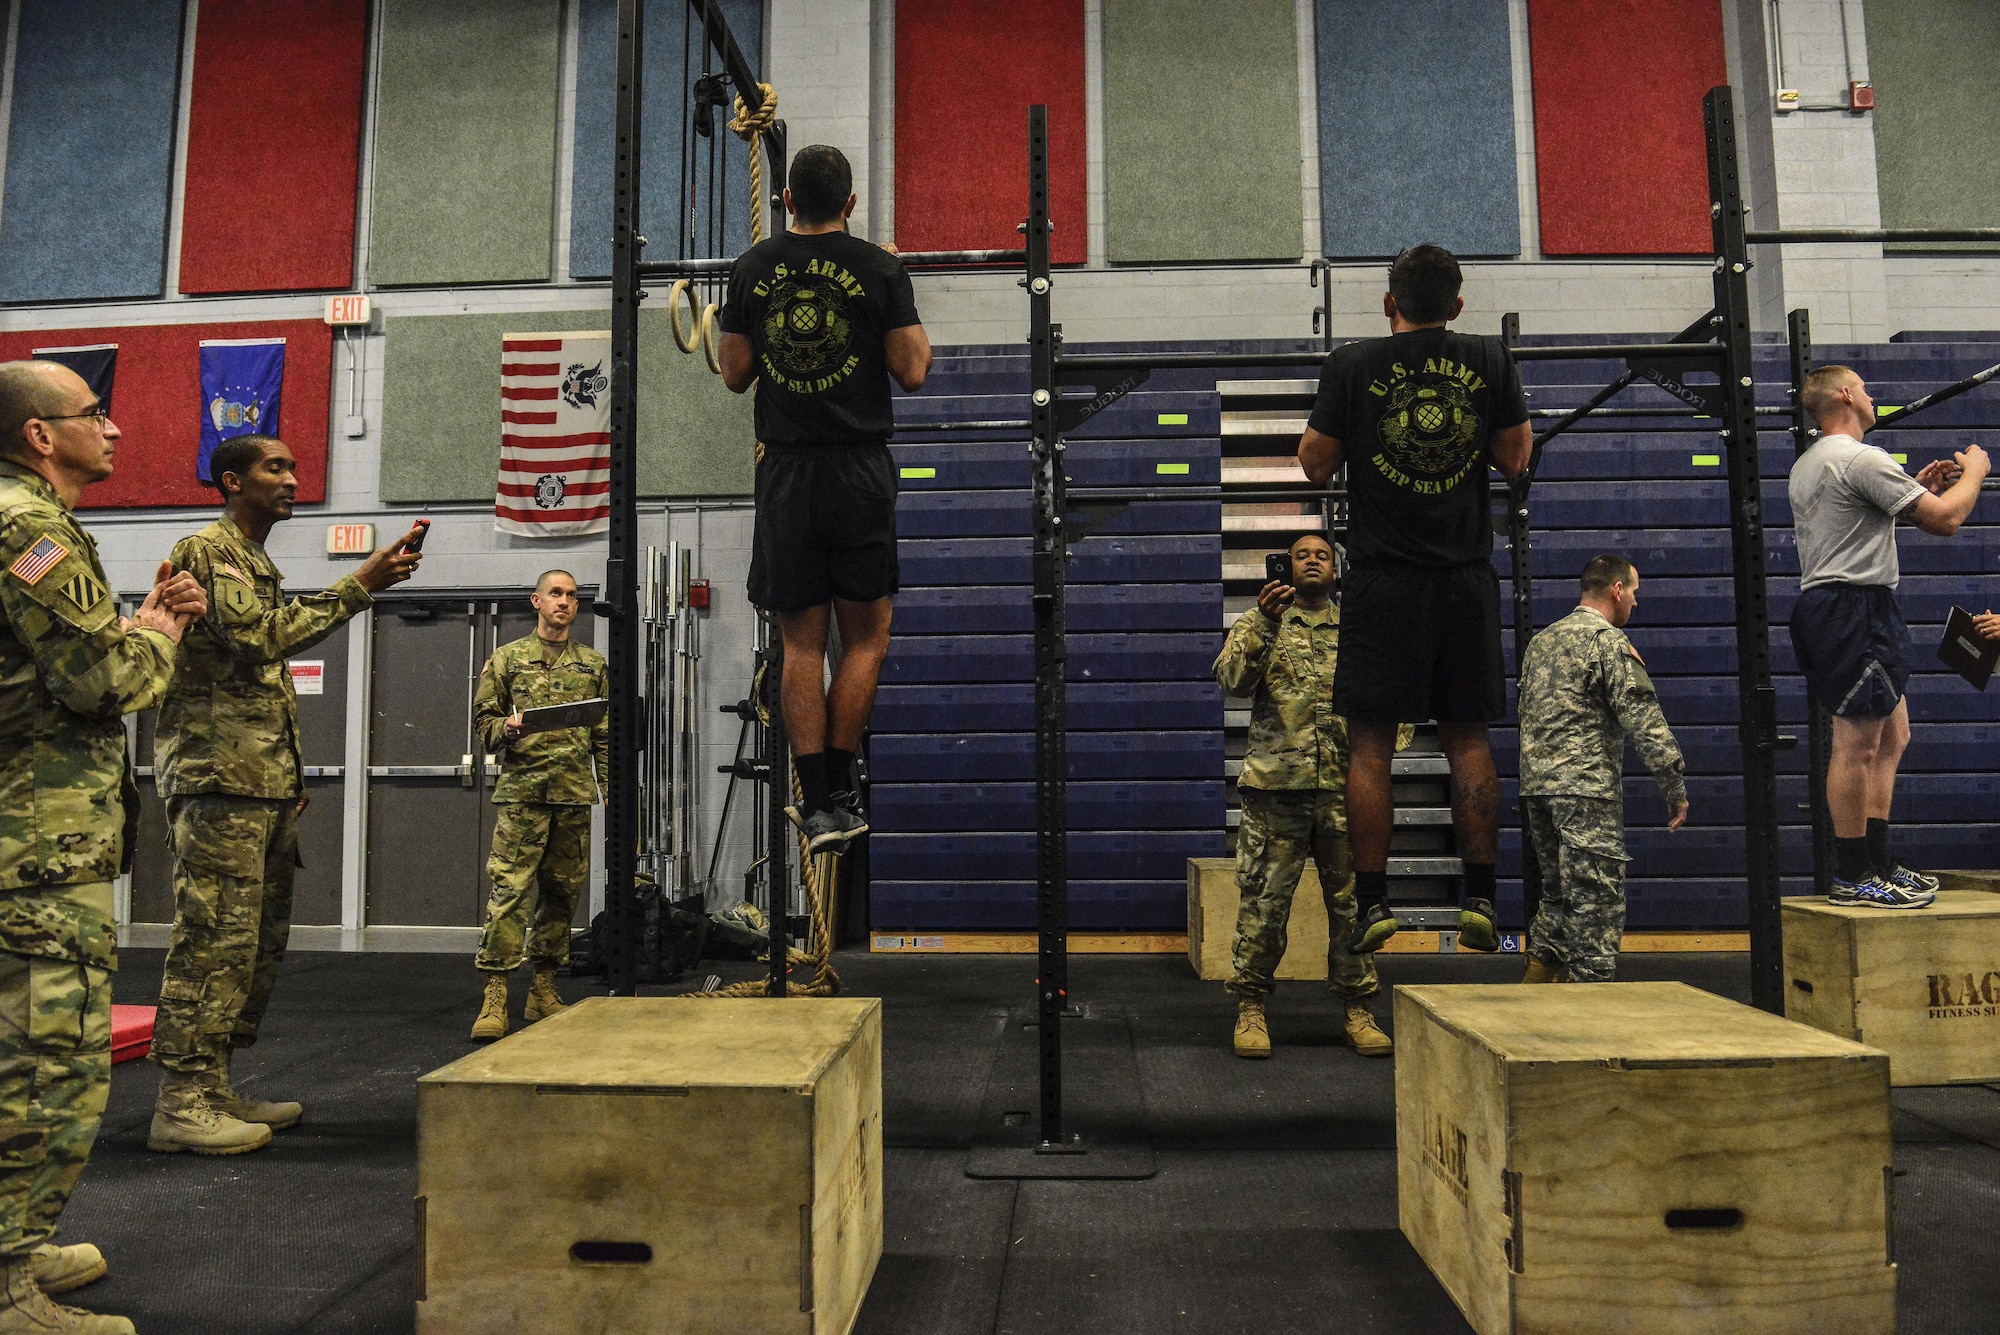 German Armed Forces Badge for military Proficiency proctors evaluate U.S. Air Force Airmen, U.S. Army Soldiers and U.S. Navy Sailors performing a flexed-arm hang during the GAFPB at Joint Base Langley-Eustis, Va., Nov. 1, 2016.  The GAFPB flexed-arm hang is just one of three events that make up the basic fitness test; a five second hold is the minimum requirement to pass.  (U.S. Air Force photo/Tech Sgt. Daylena S. Ricks)